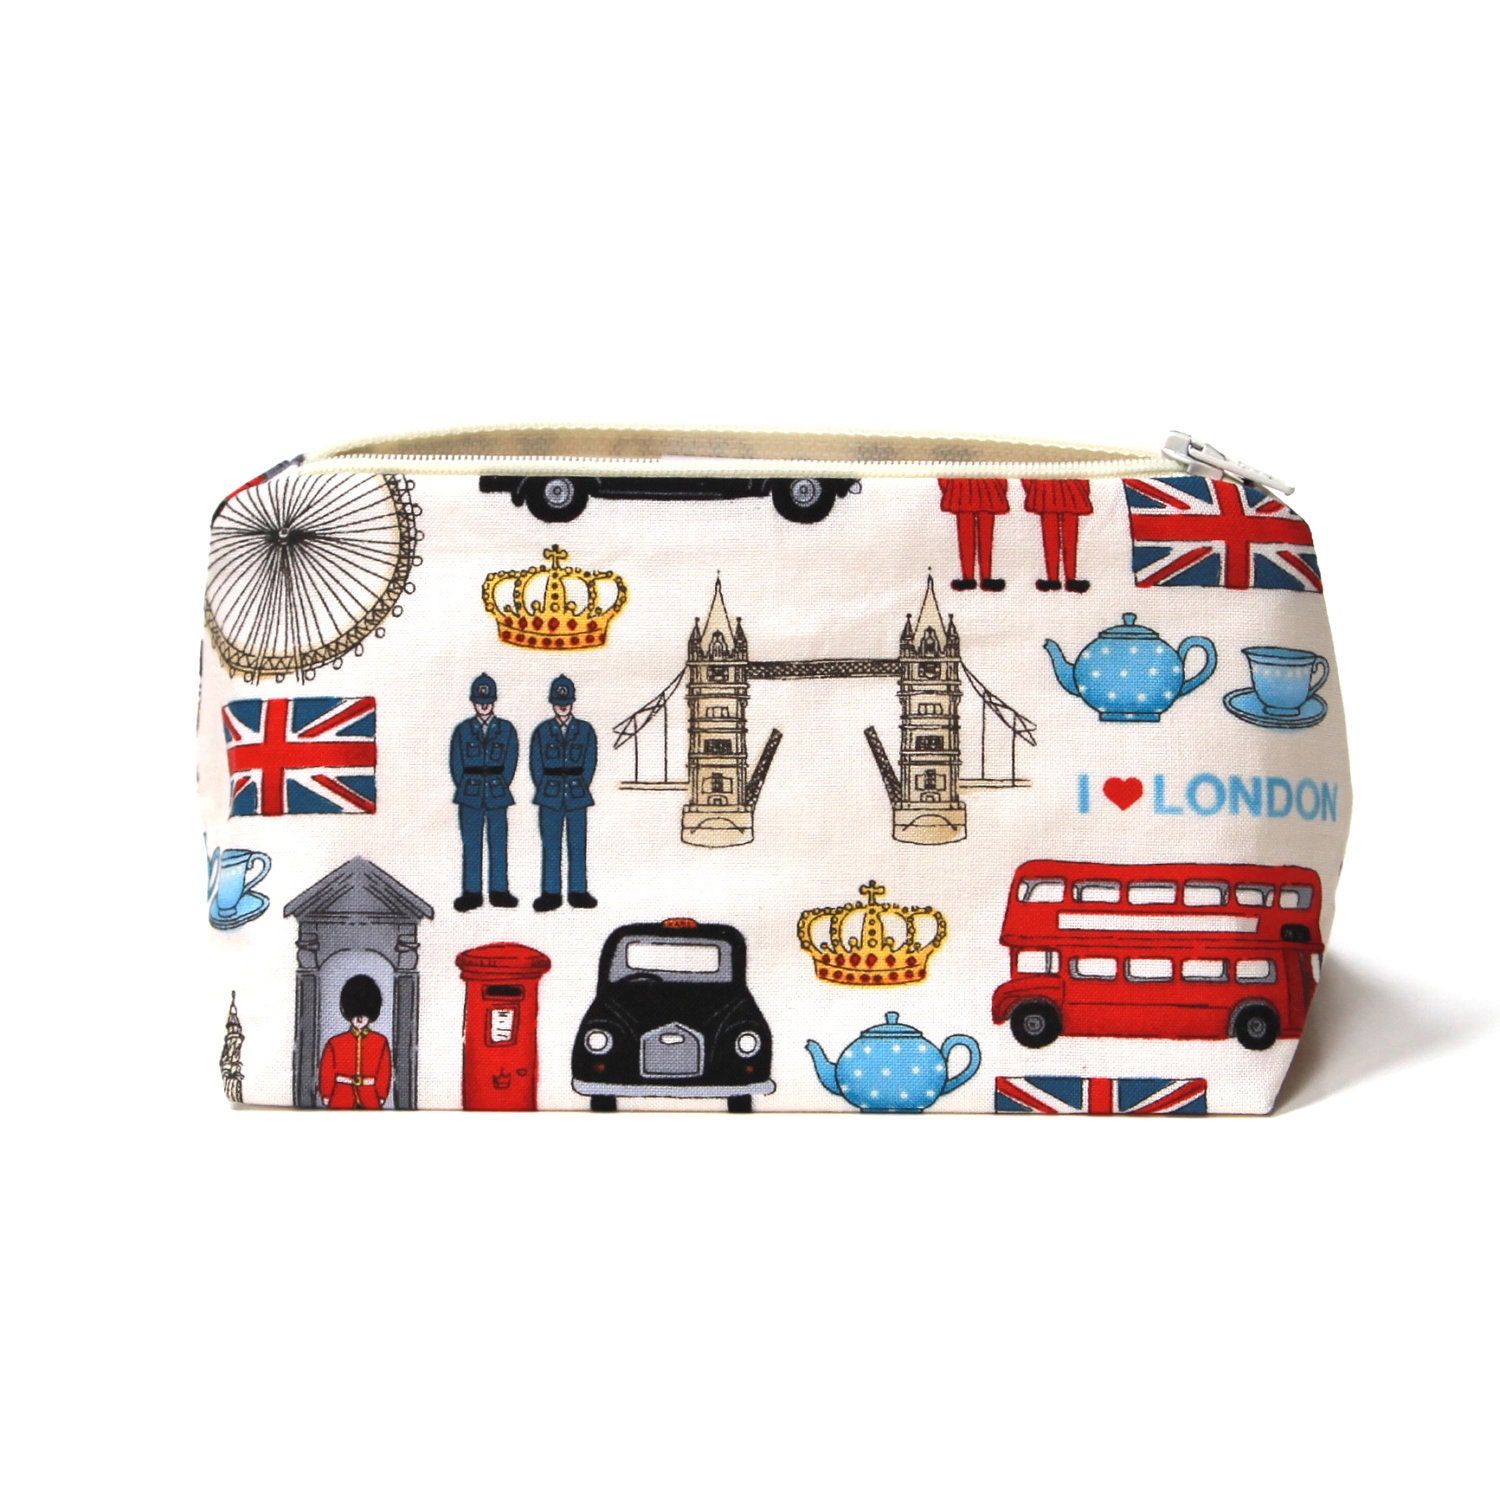 London, England Themed Cosmetic Bag, Cosmetic Case, Makeup Bag - Birthday Gift Idea, Novelty Party Favor, Stocking Stuffer